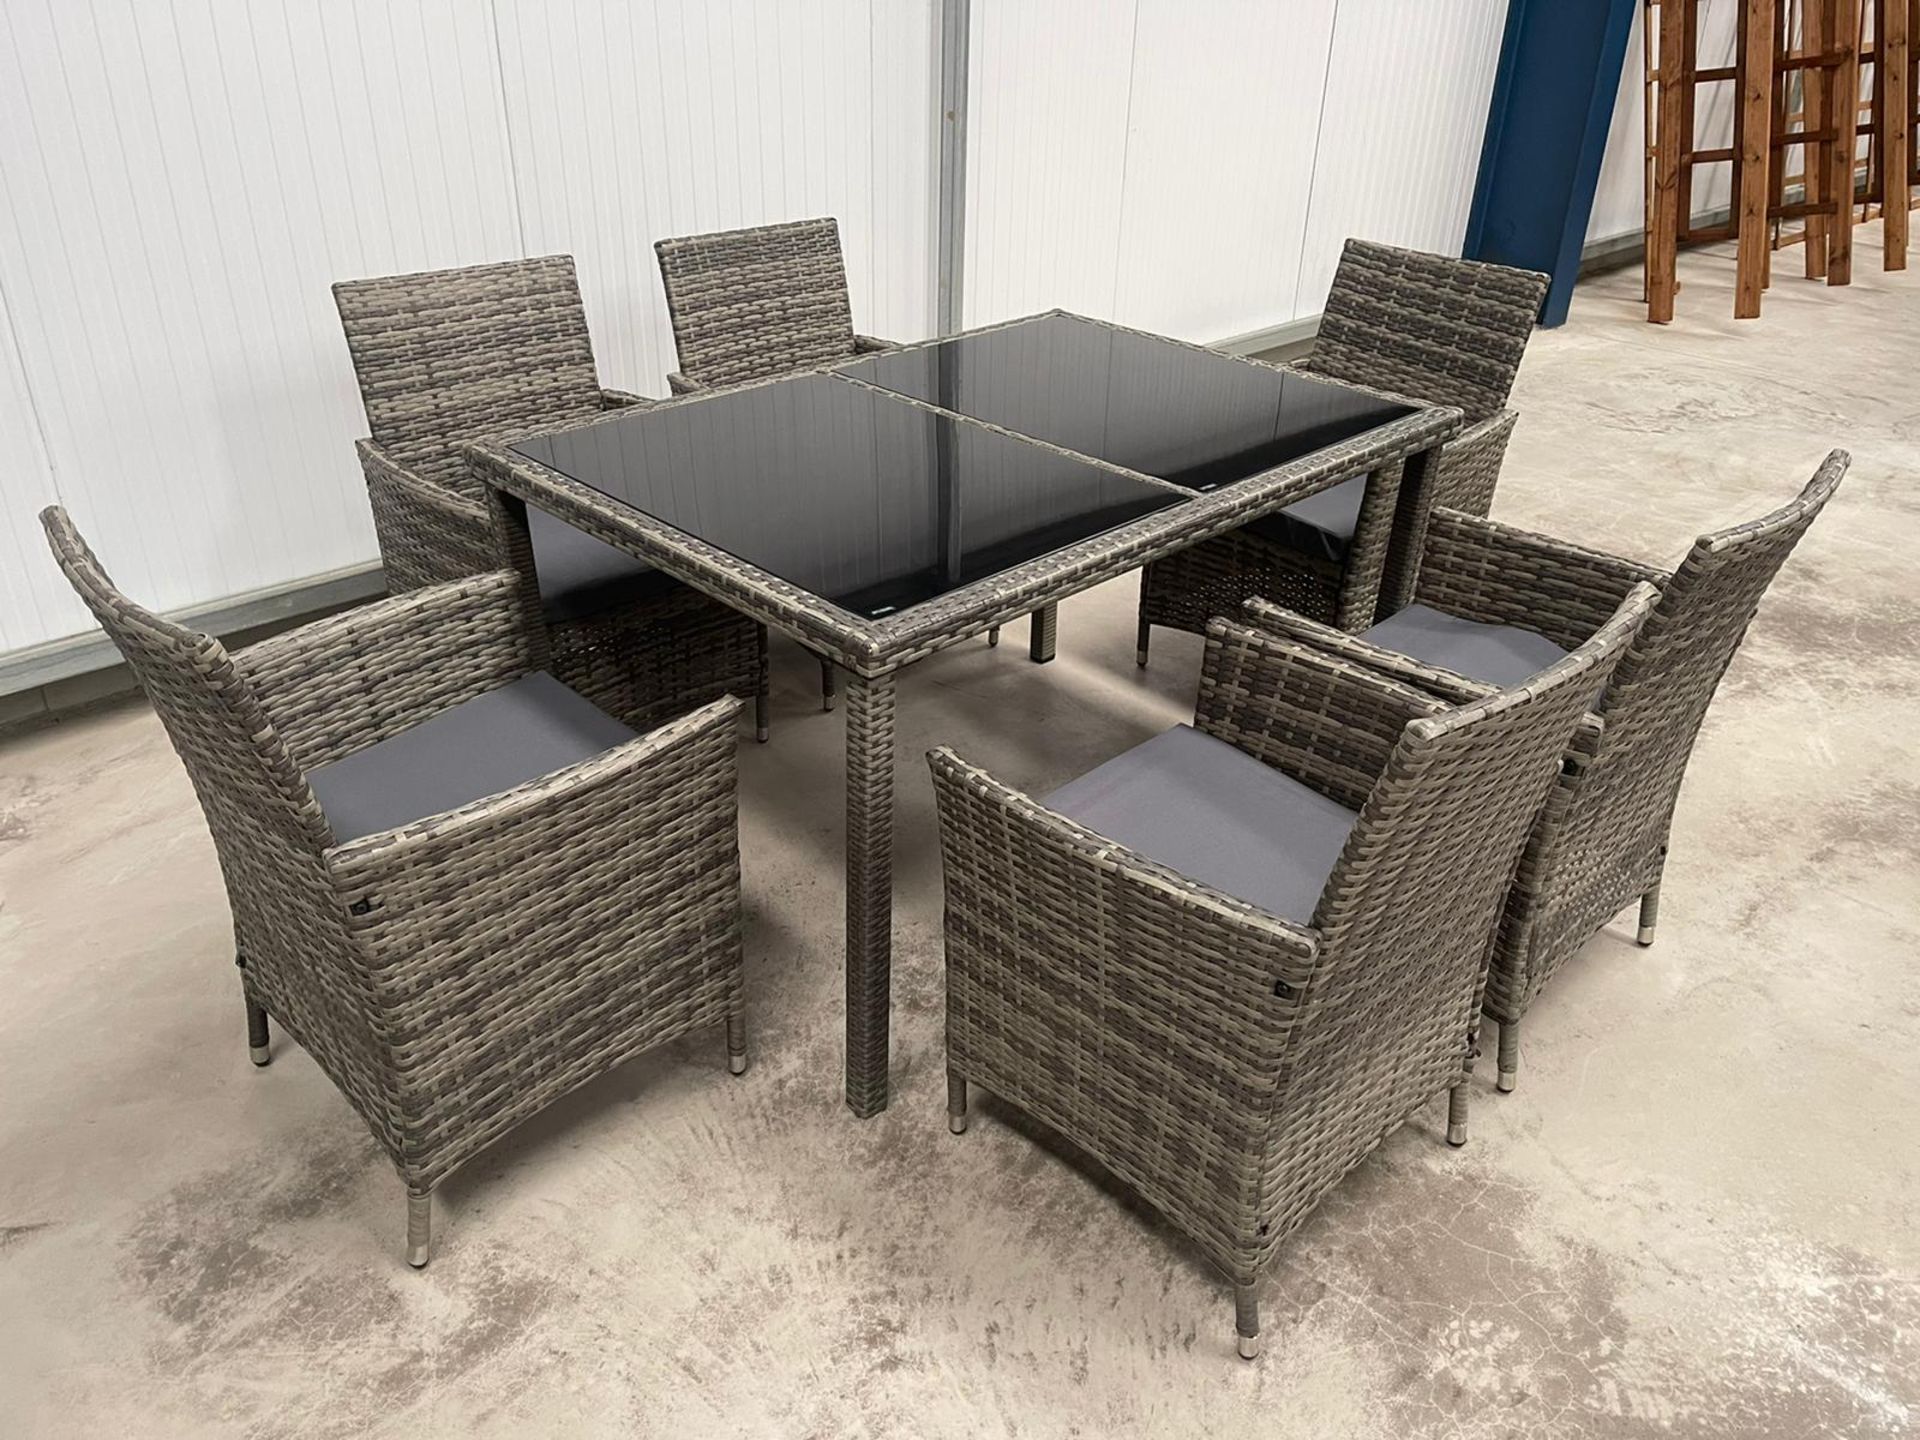 RRP £999 - NEW GREY SIX SEAT DINING SET WITH SIX CHAIRS - LUXURY BLACK GLASS TOPPED DINING TABLE AND